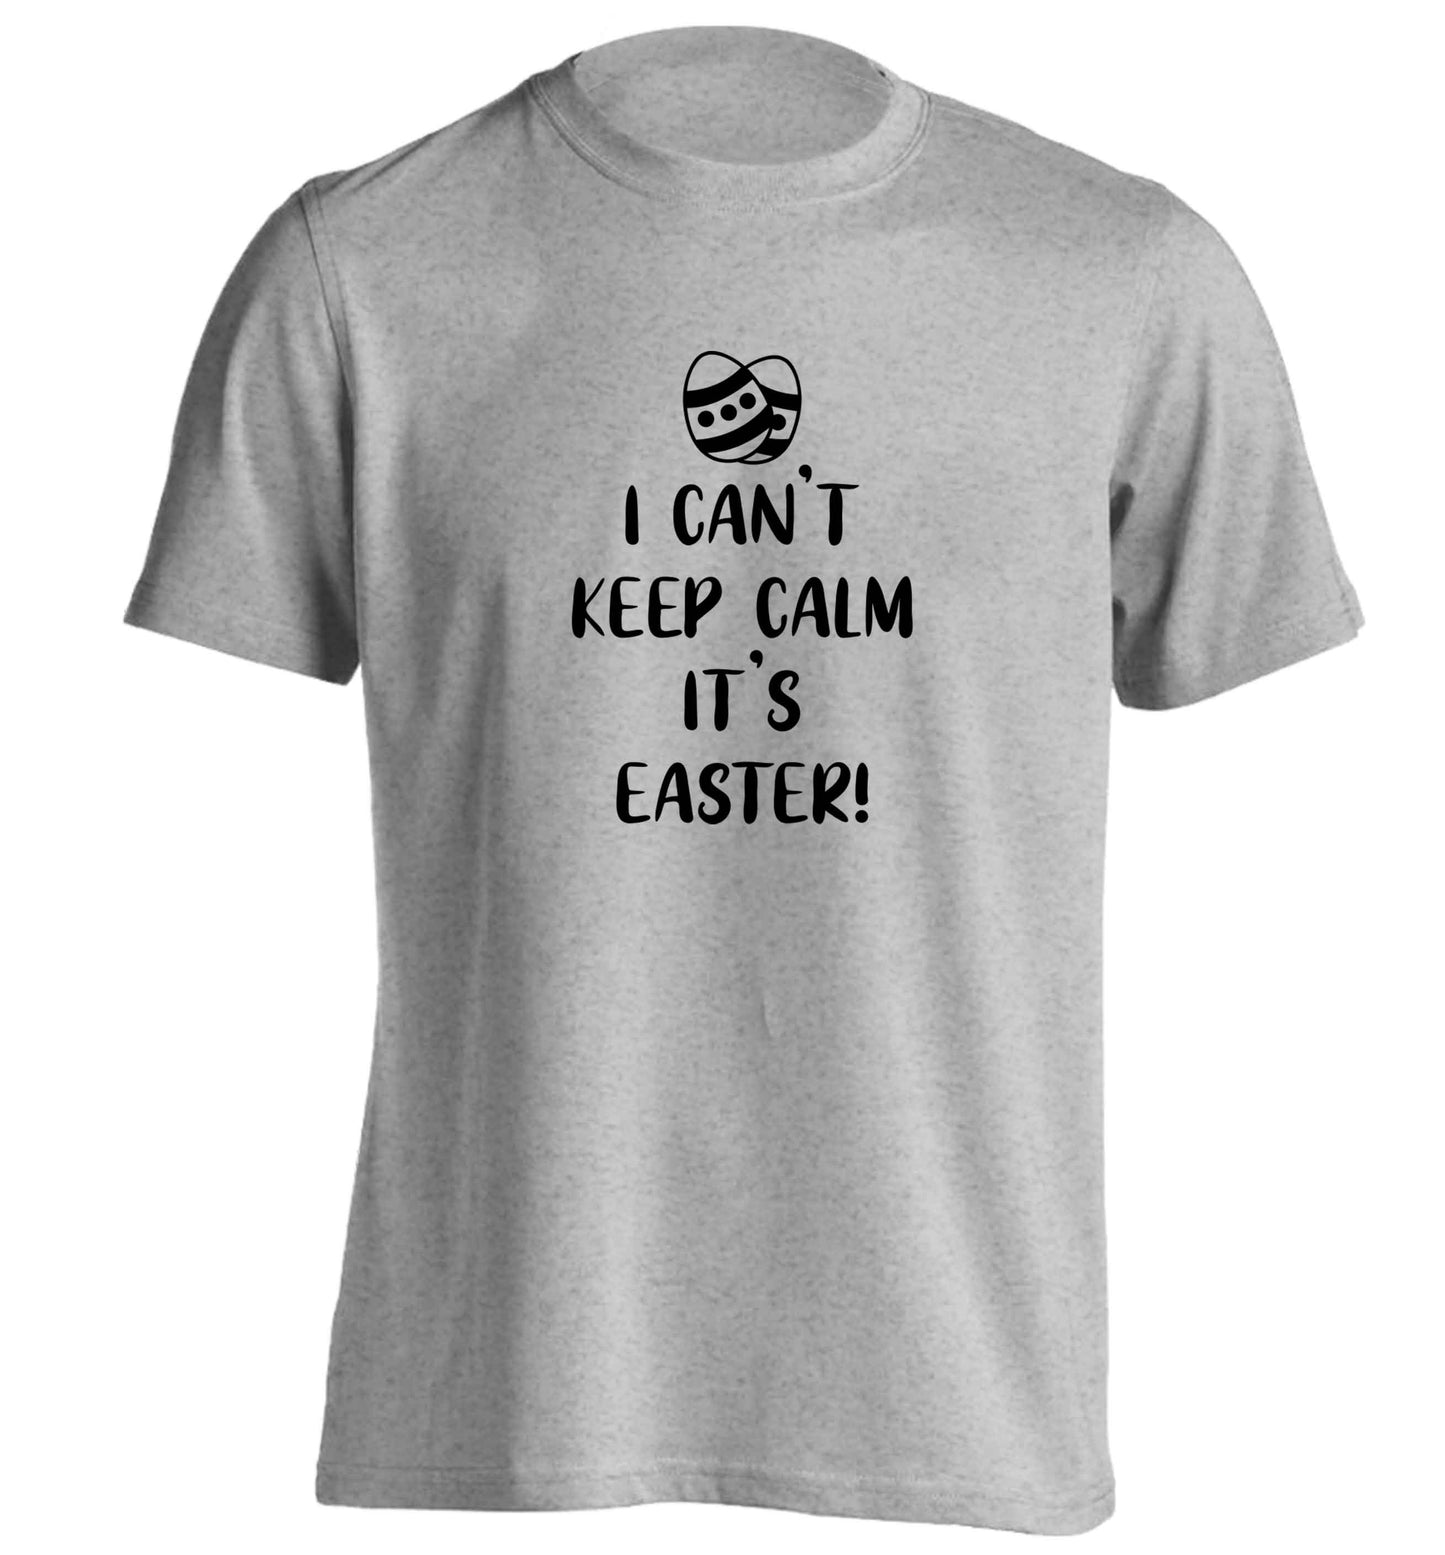 I can't keep calm it's Easter adults unisex grey Tshirt 2XL